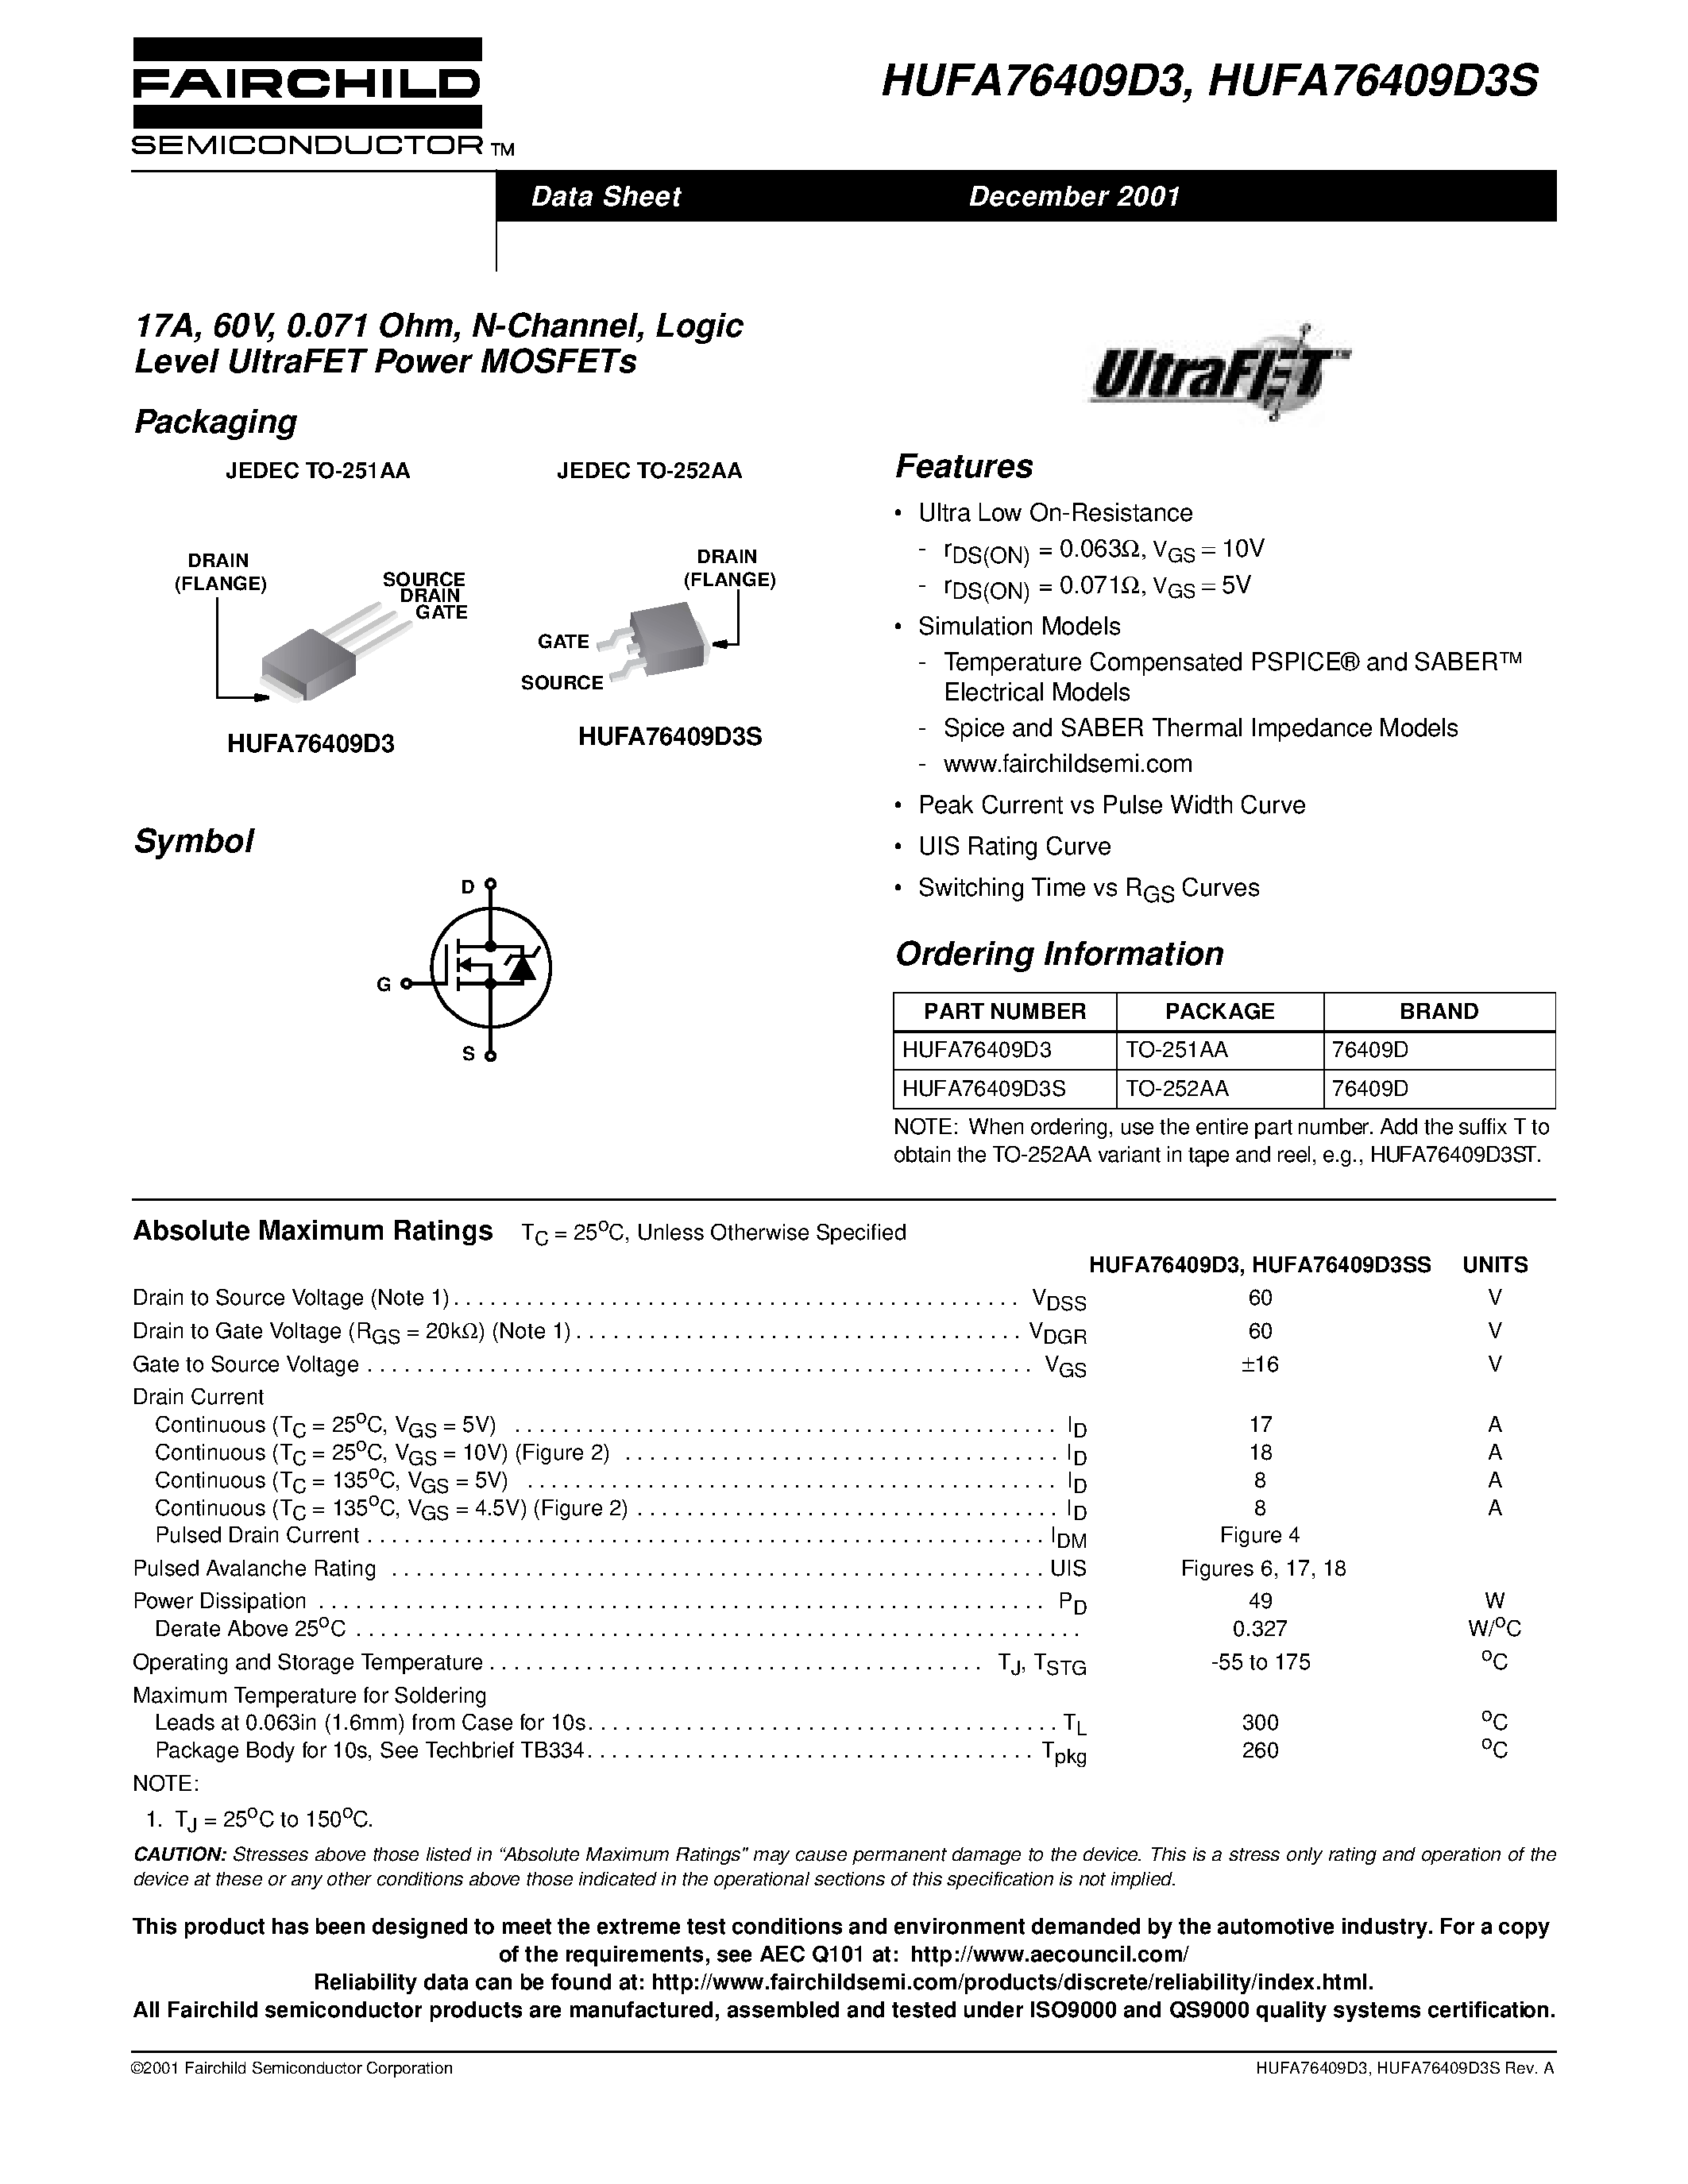 Datasheet HUFA76409D3S - 17A/ 60V/ 0.071 Ohm/ N-Channel/ Logic Level UltraFET Power MOSFETs page 1